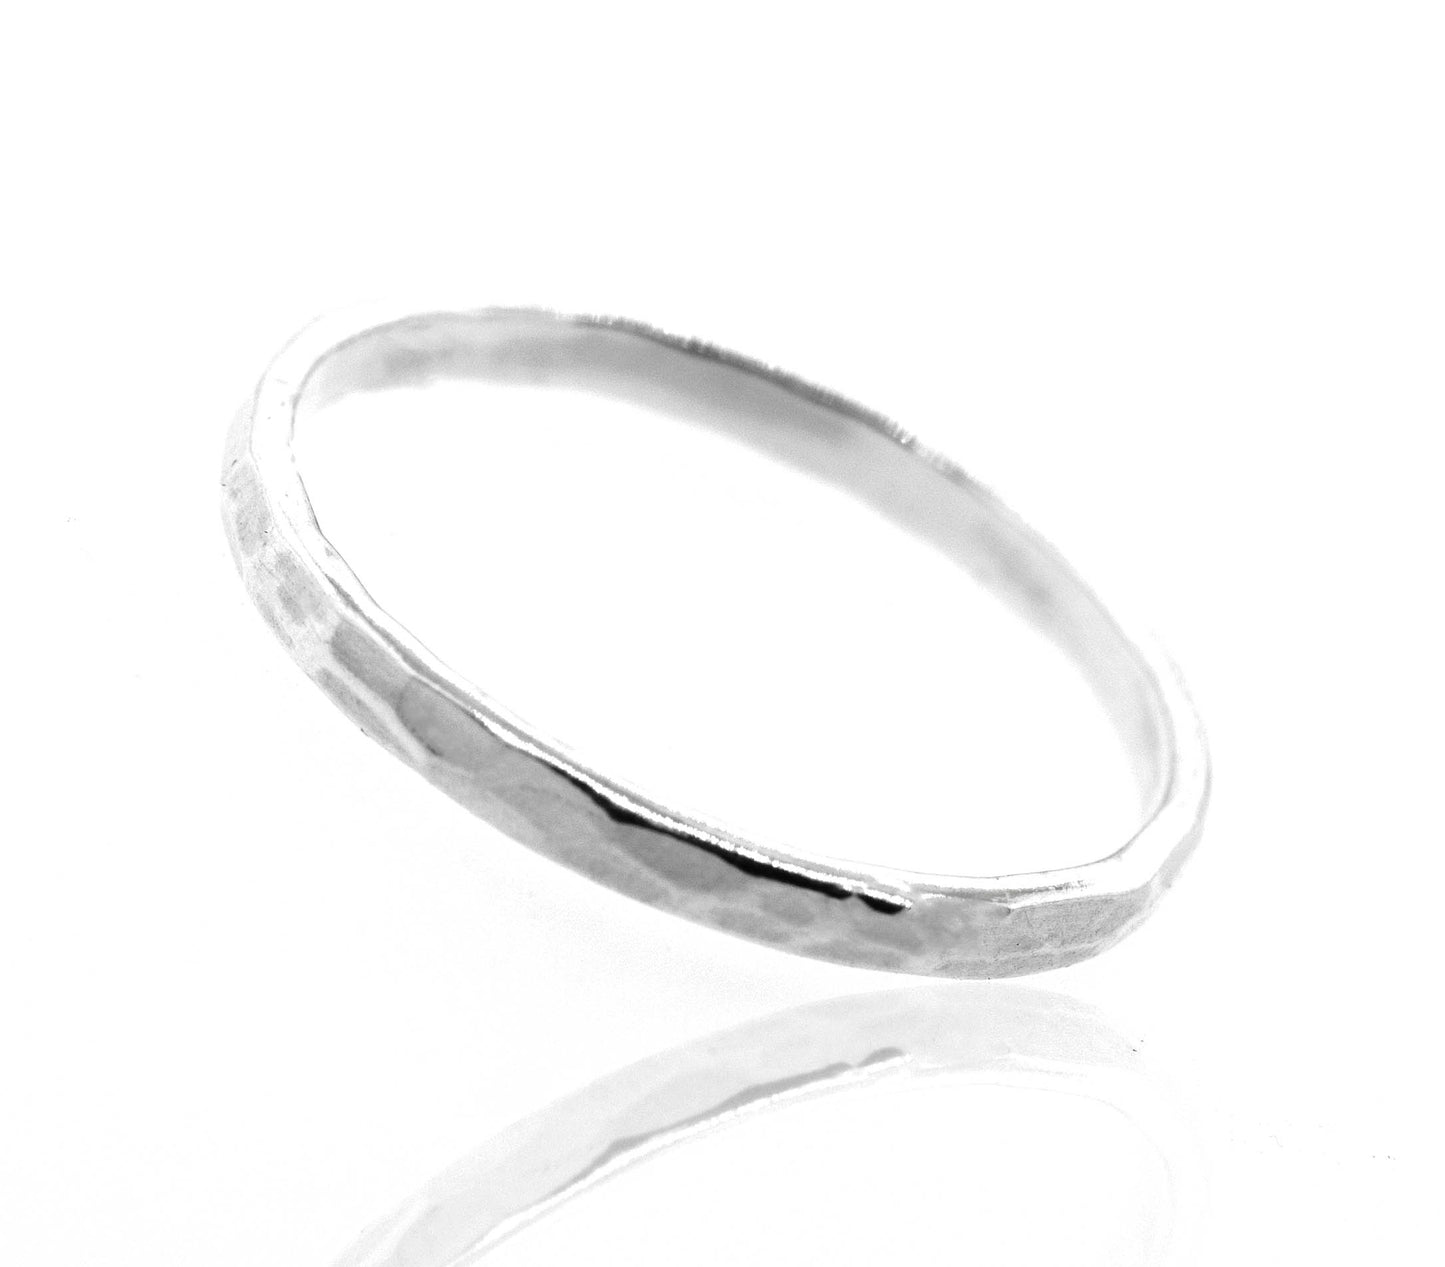 A Super Silver Stylish 2mm Hammered Band with a simplistic style on a white surface.